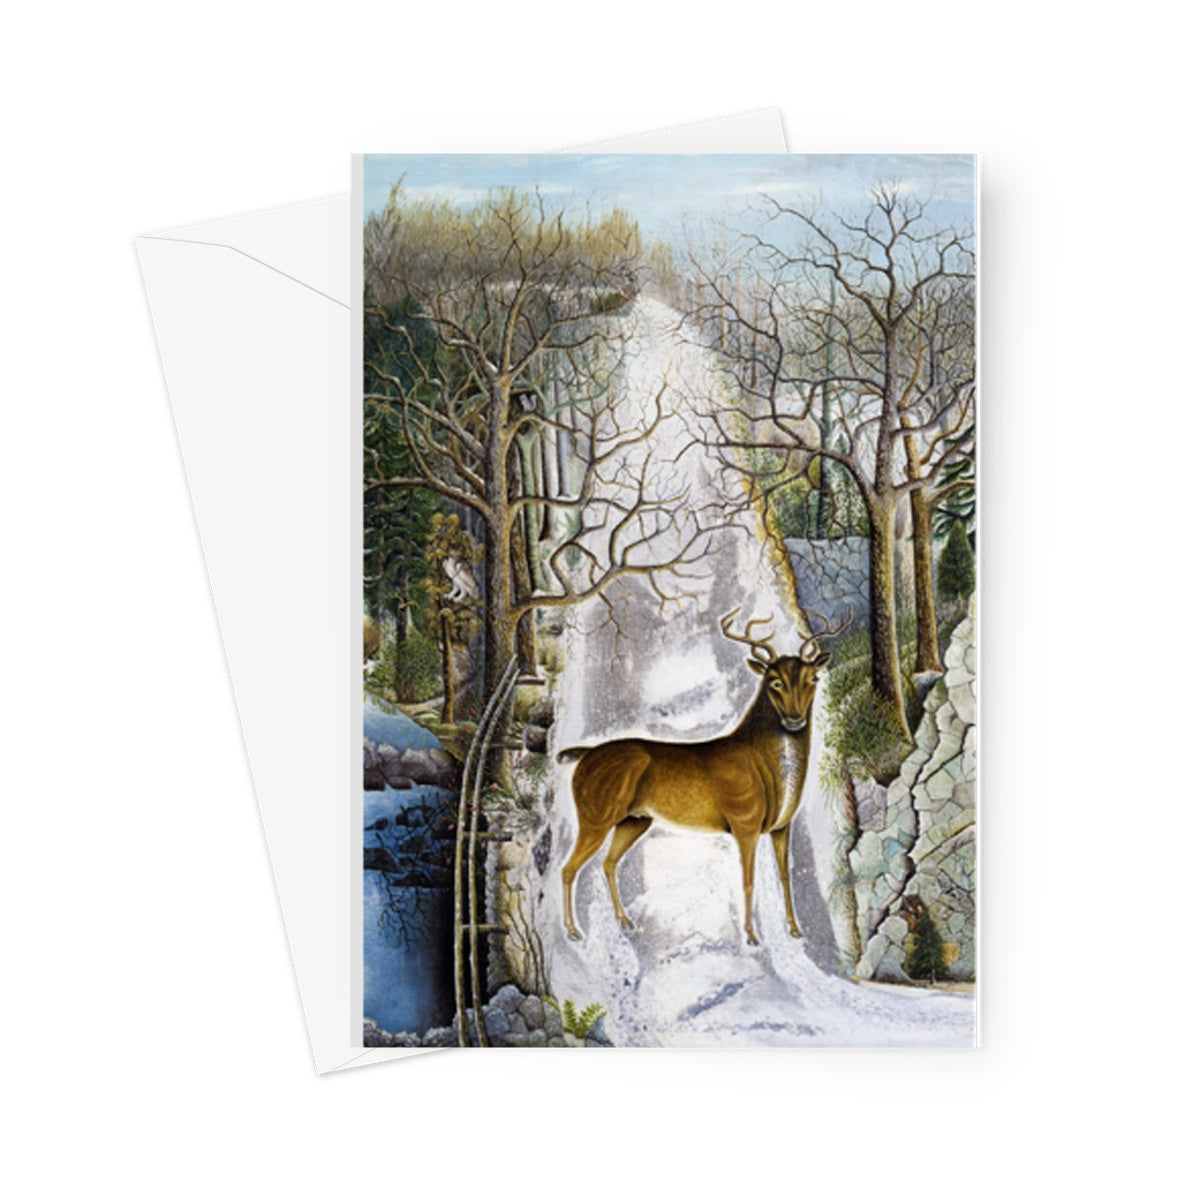 Stag at Echo Rock, 19th century - Greetings Card